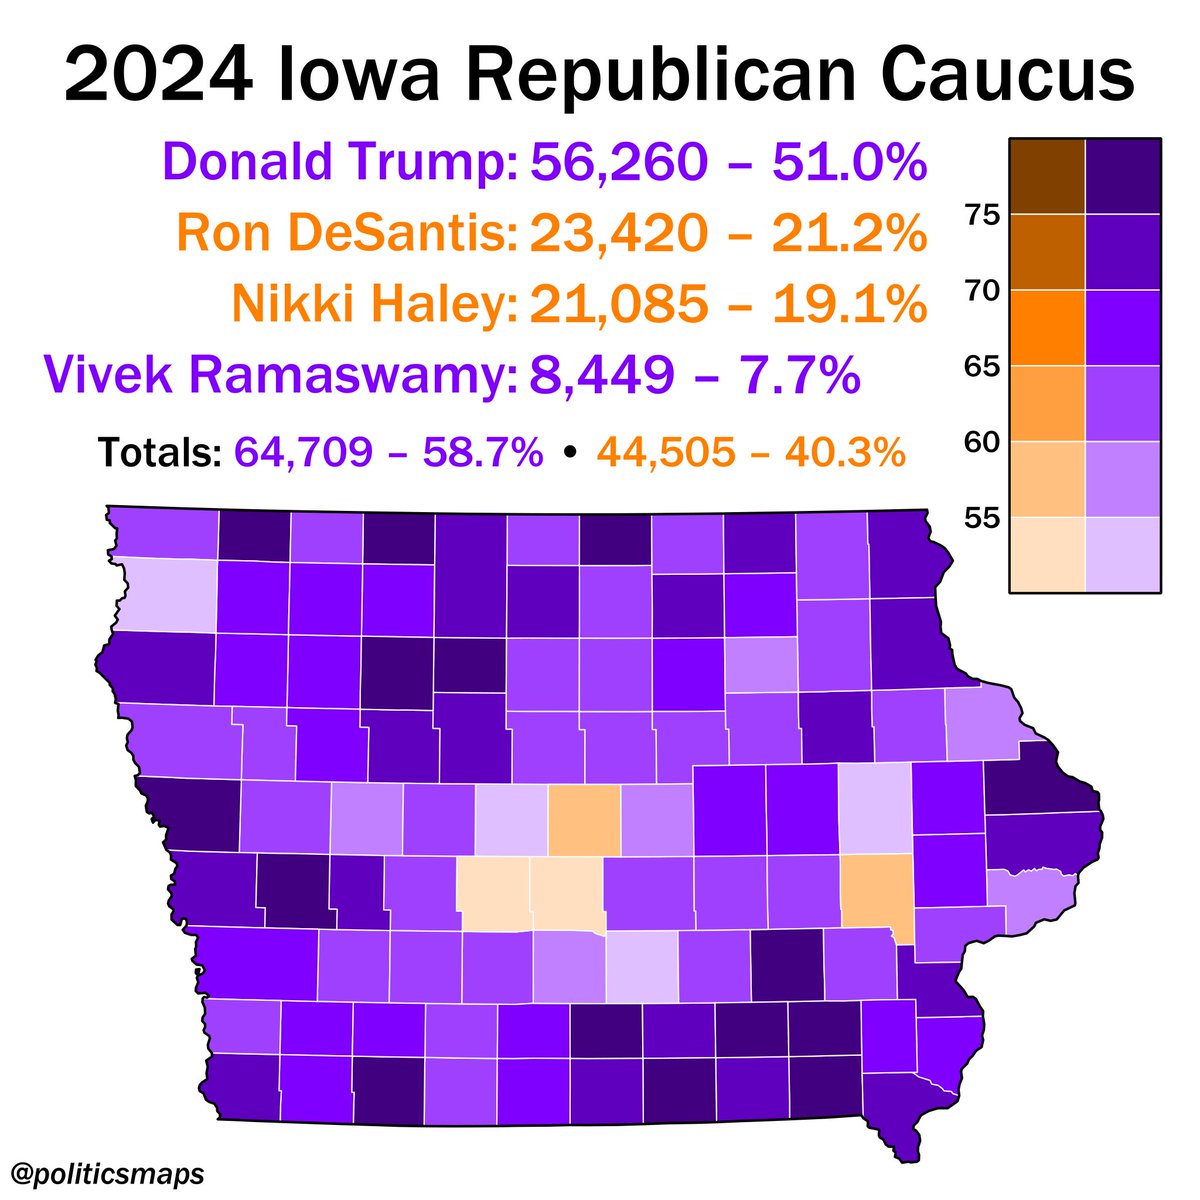 Although former President Trump swept all but one of Iowa's counties in its quadrennial caucus, the totals split into two blocs yields a more interesting map. Note: Haley and DeSantis may not have overlapping appeals. Rather, this map shows the 'Trumpy'/non-Trump 'coalitions'.